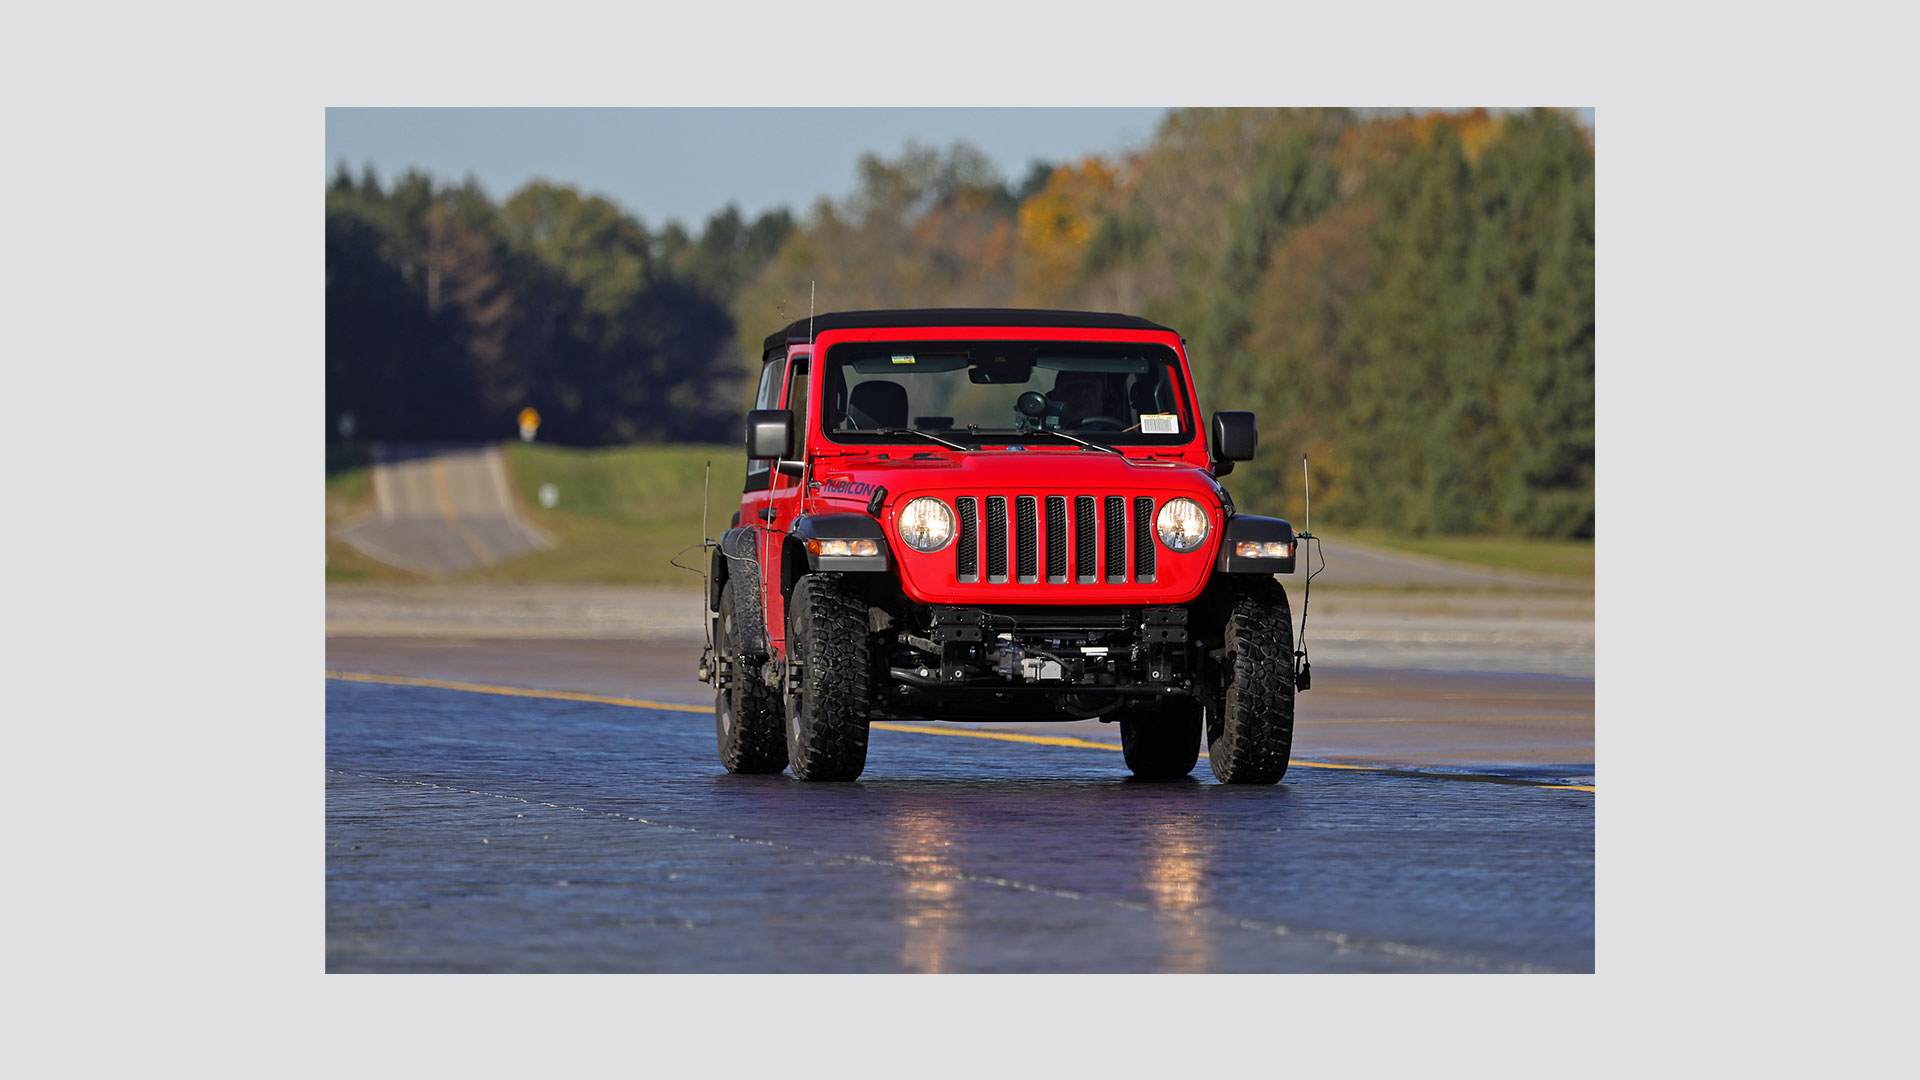 Image of a red Jeep on Skid Traction